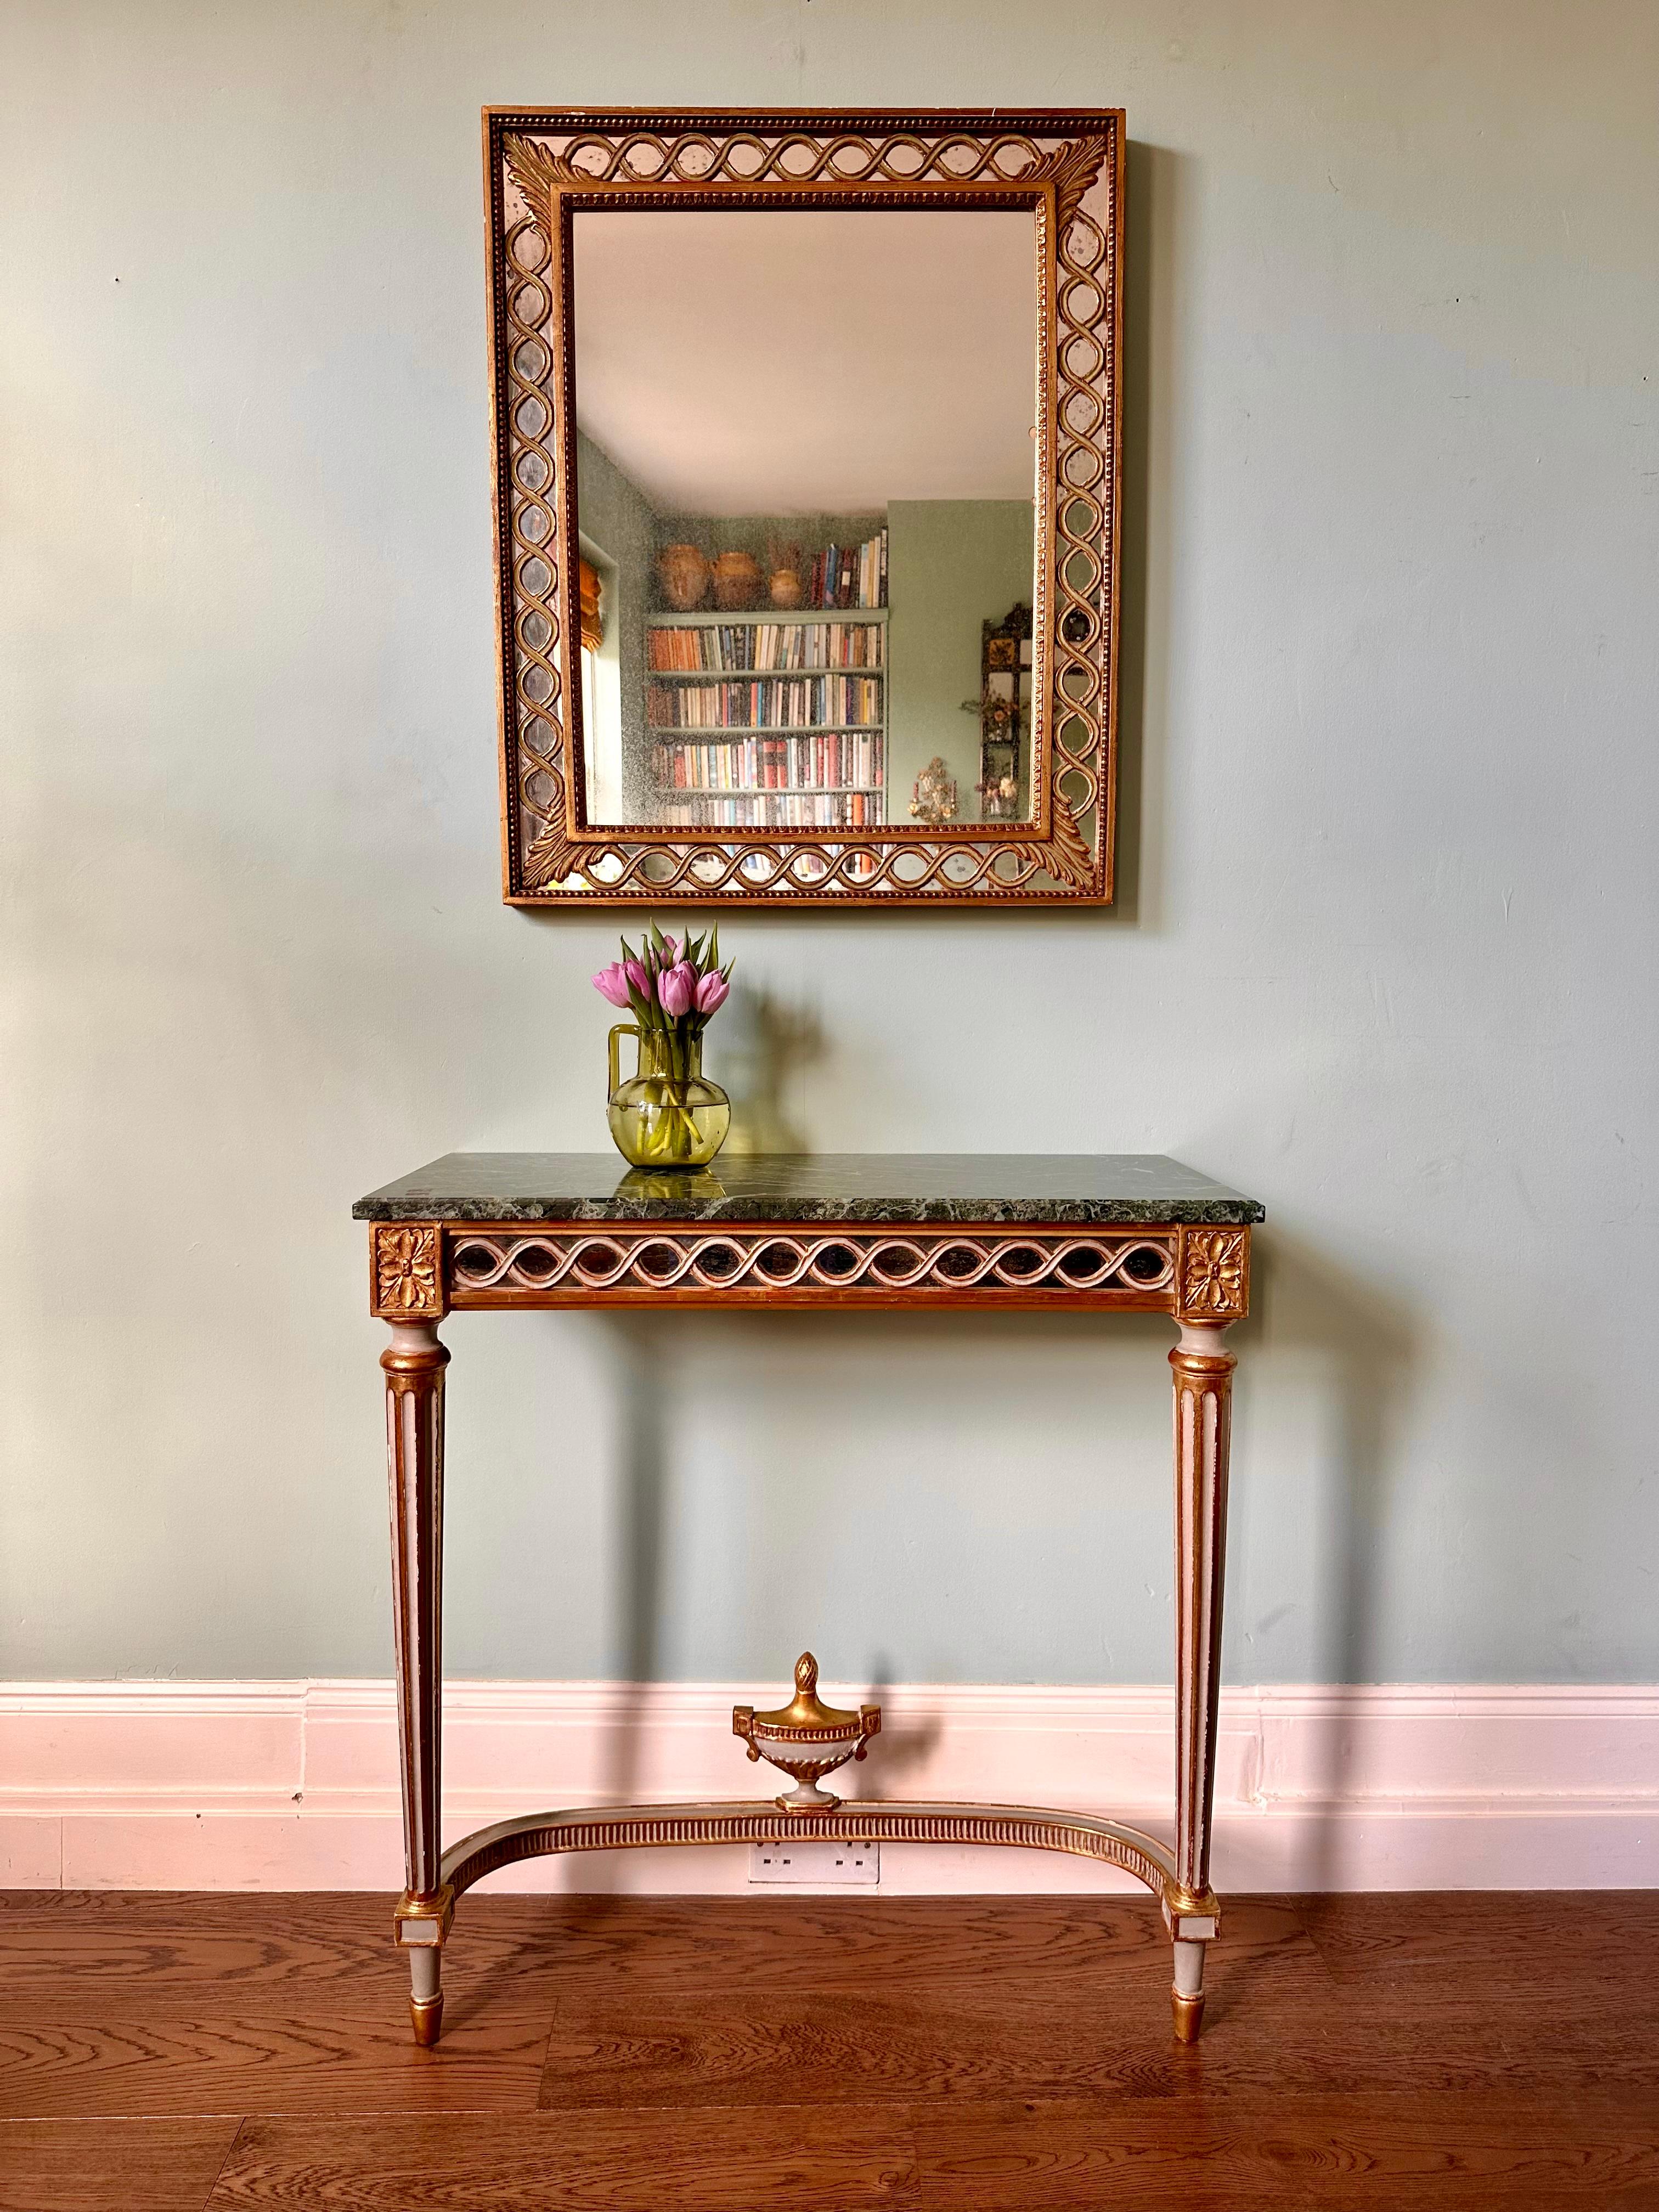 C19th Louis XVI style console and matching mercury mirror.

Superb French console table with Verde Antico marble top, mirrored apron, fluted legs joined by an urn stretcher and beautiful gilded detailing. The matching mirror features just the right